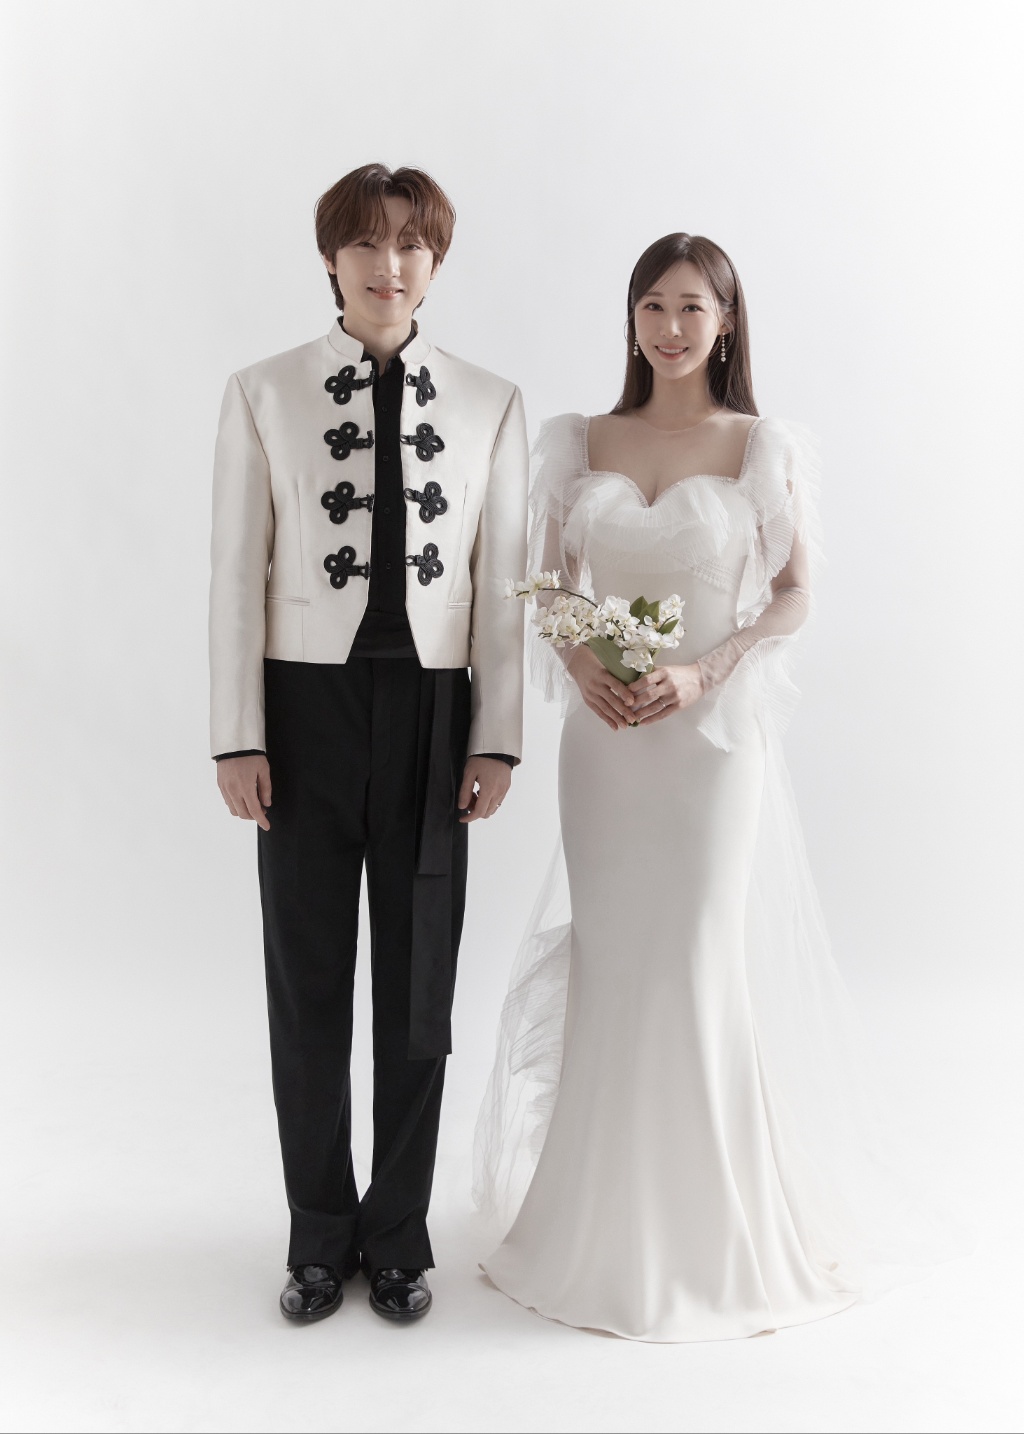 Forestella’s Kang Hyung Ho To Tie The Knot With Weathercaster Jung Min Kyung